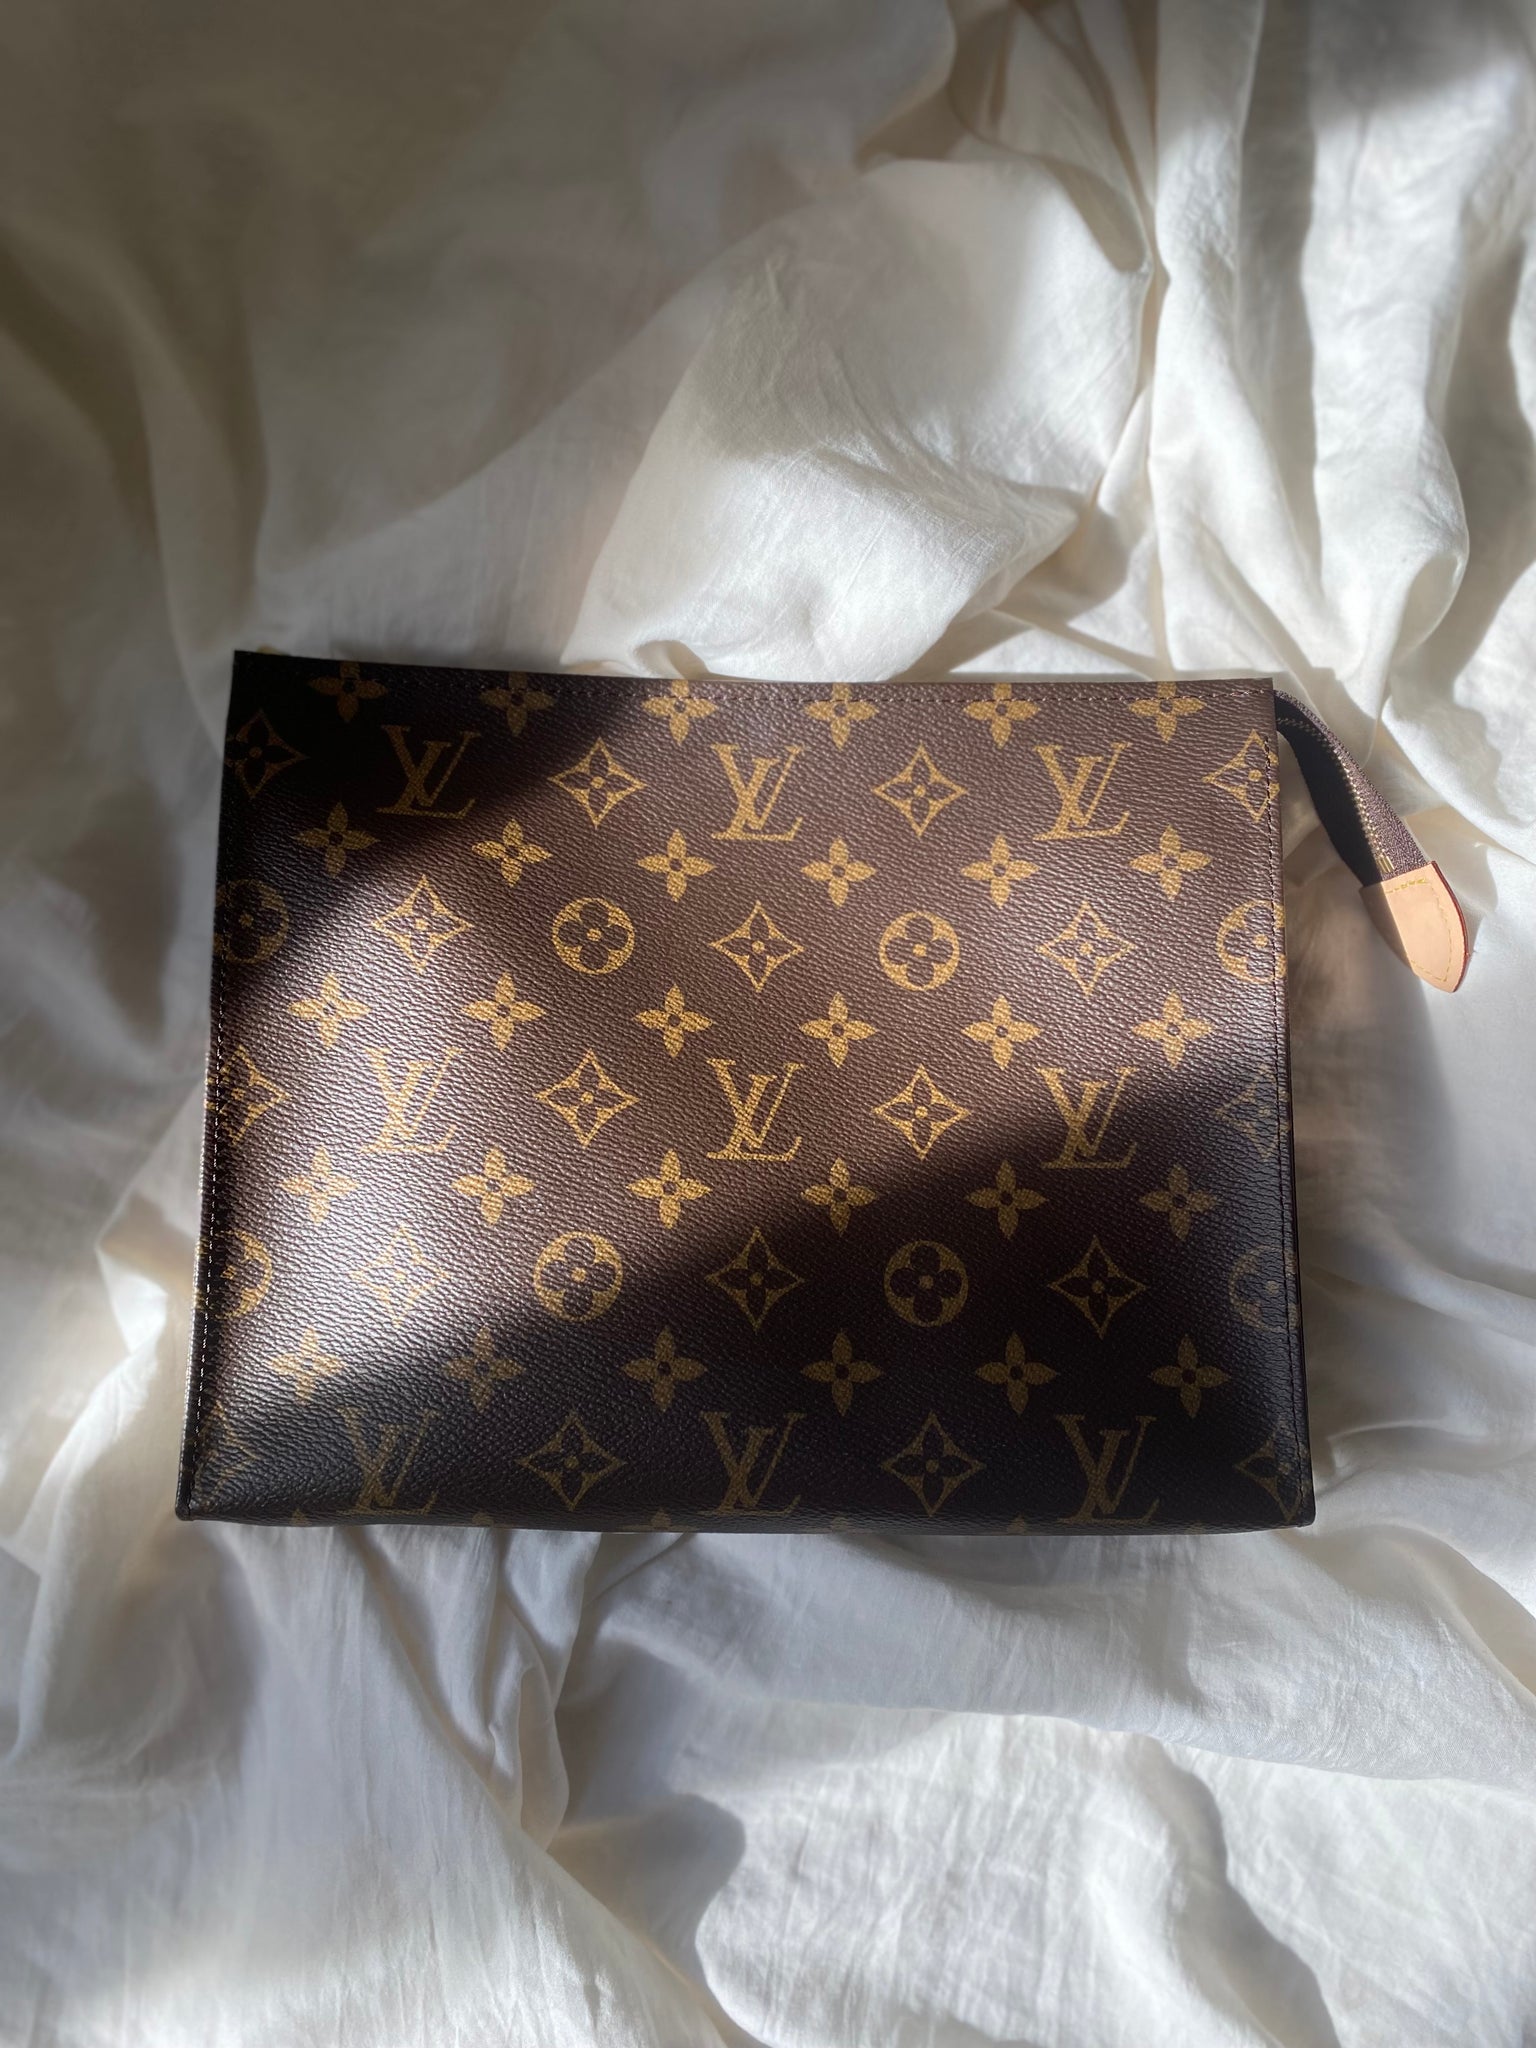 Image result for louis vuitton toiletry pouch 26